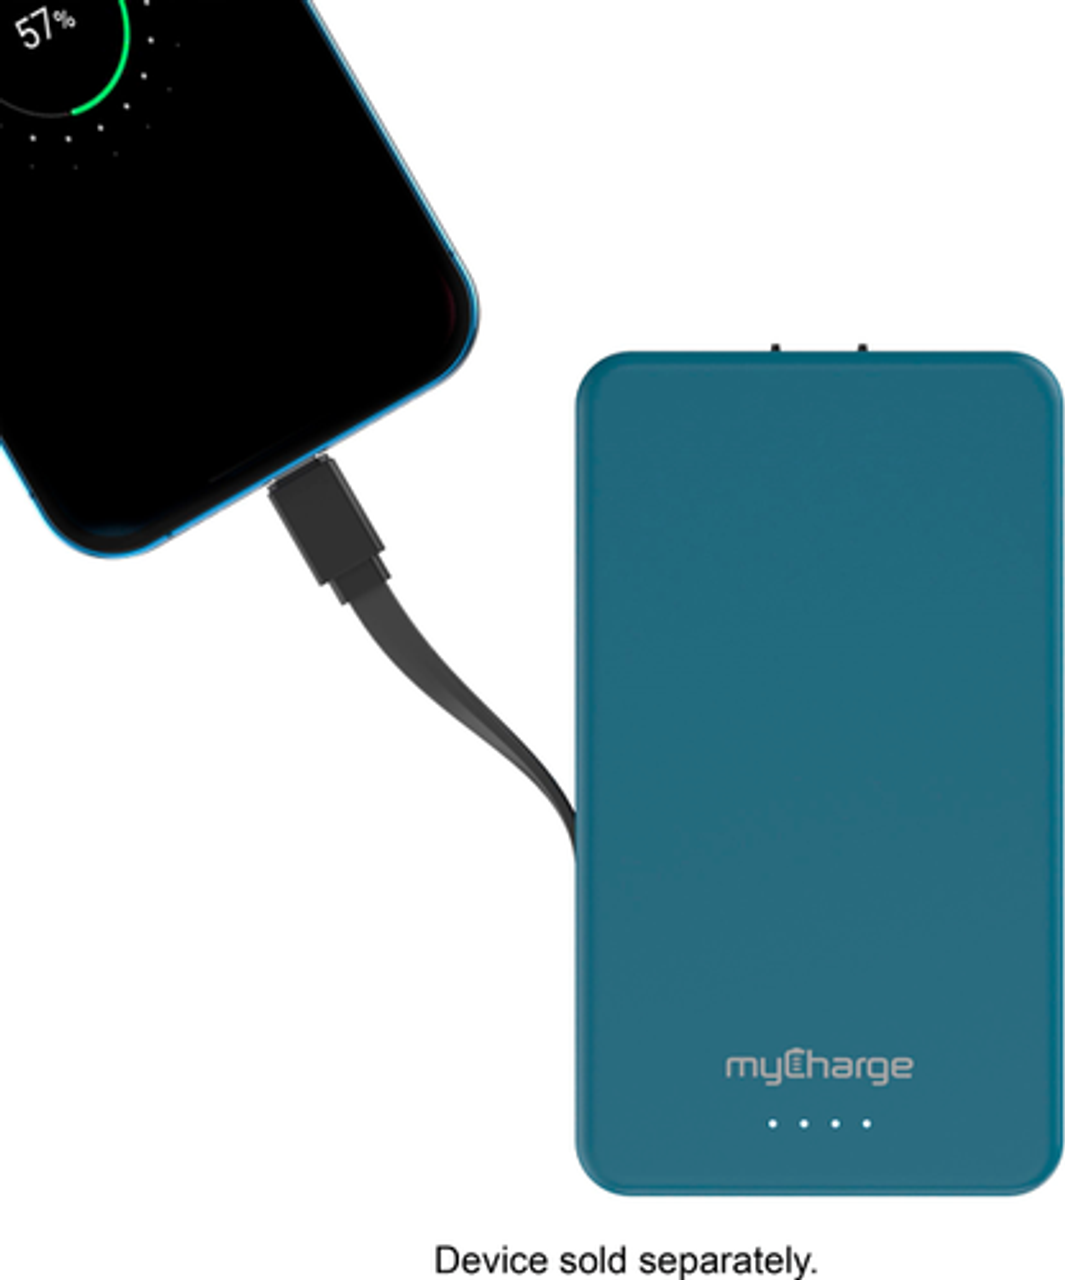 myCharge - AMP PRONG PLUS 10,000mAh Everything Built-In Portable Charge for Most USB Enables Devices - Blue